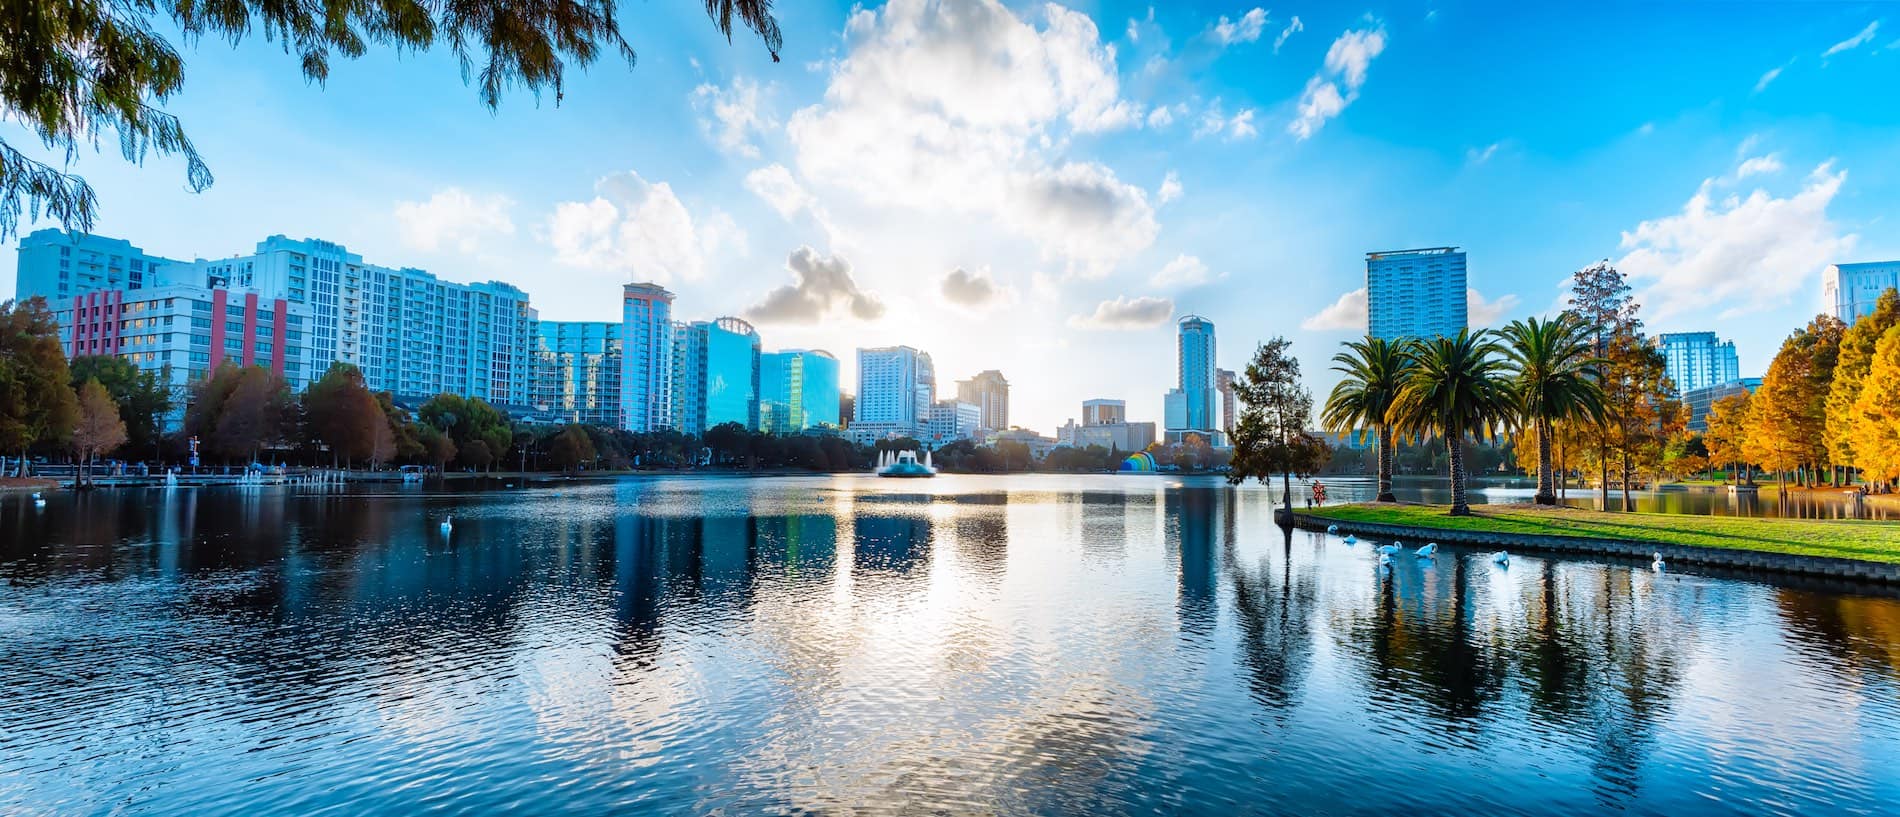 Orlando revealed: where to stay in Florida’s magic city